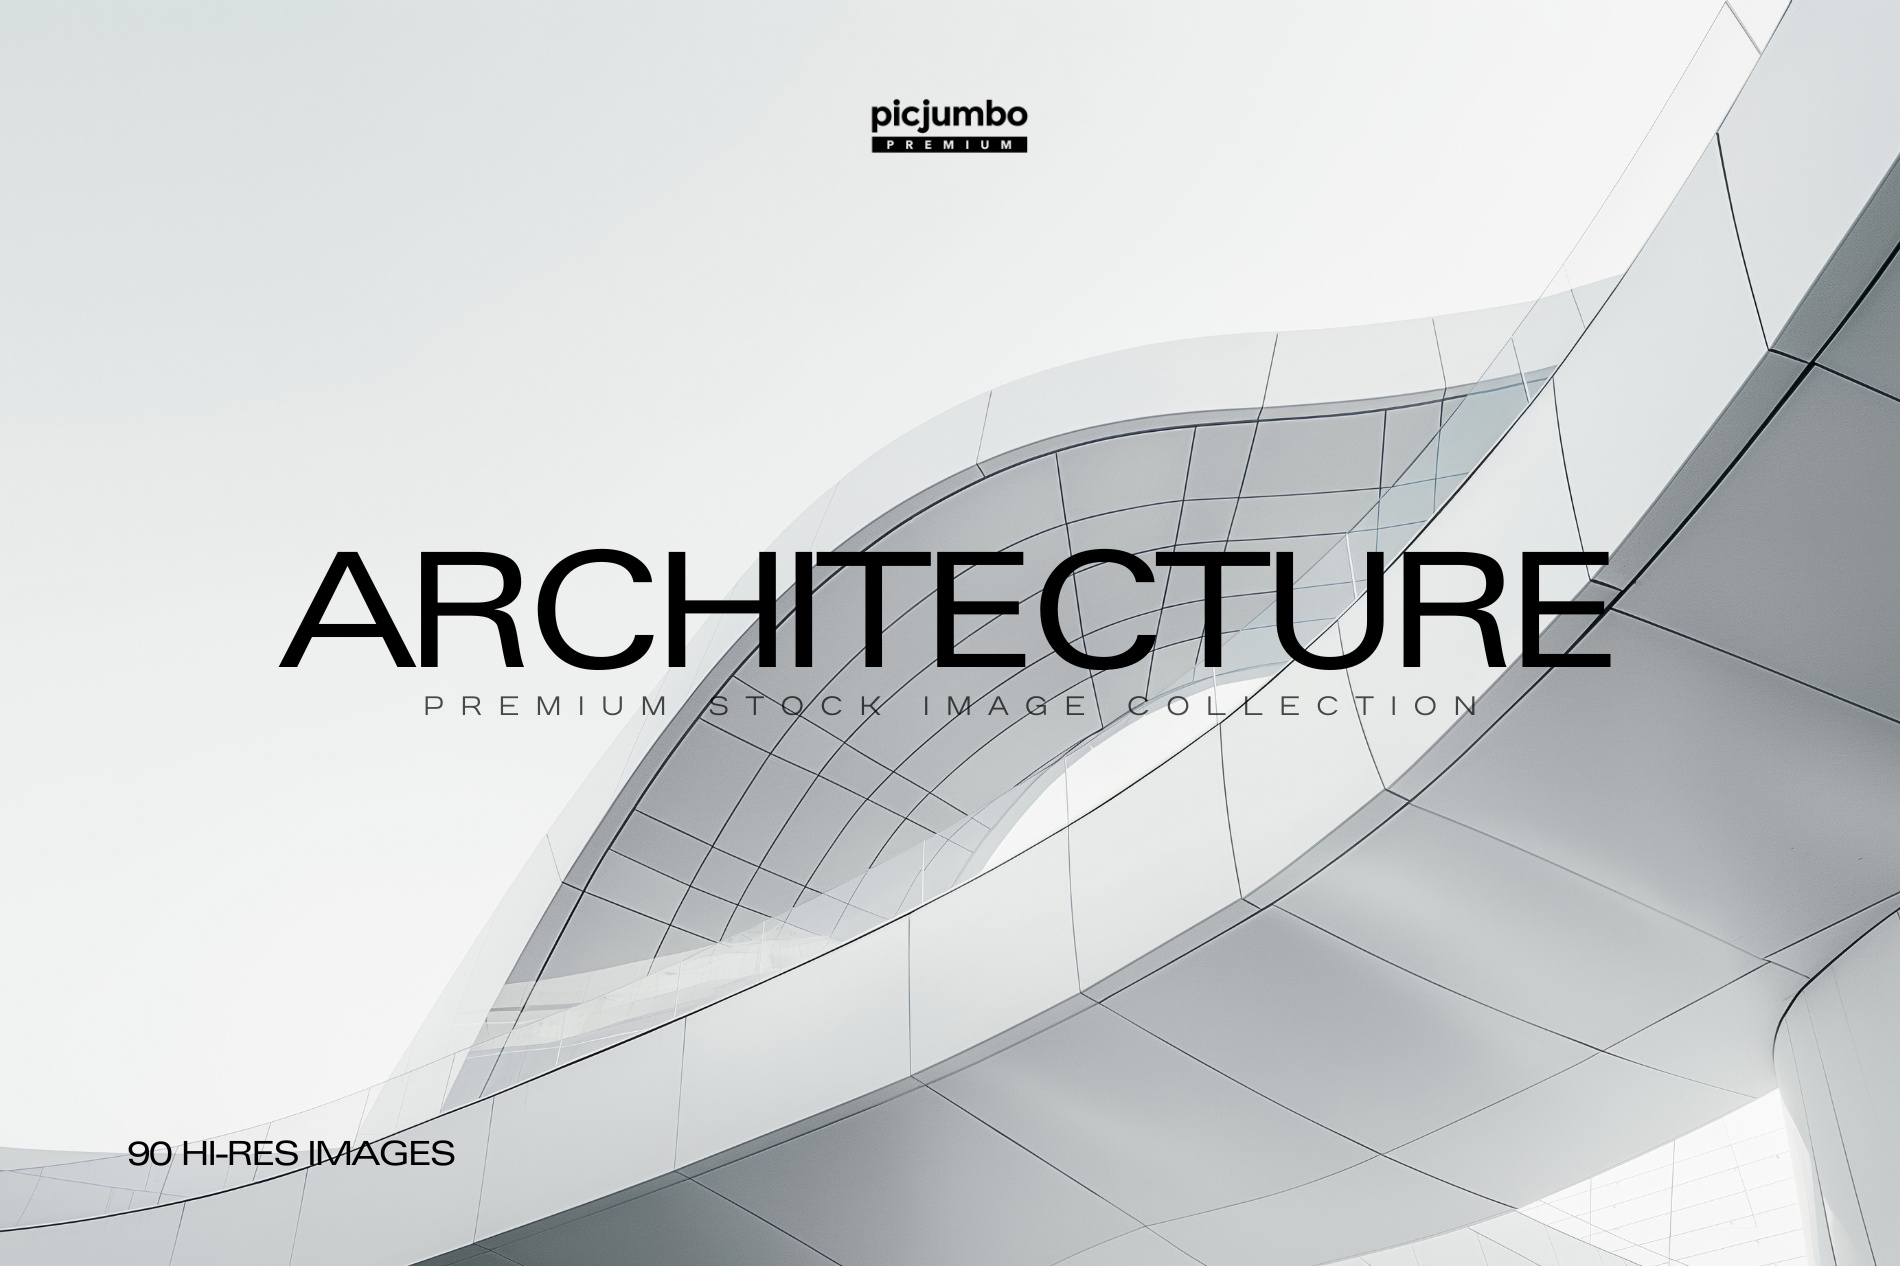 Download hi-res stock photos from our Architecture PREMIUM Collection!